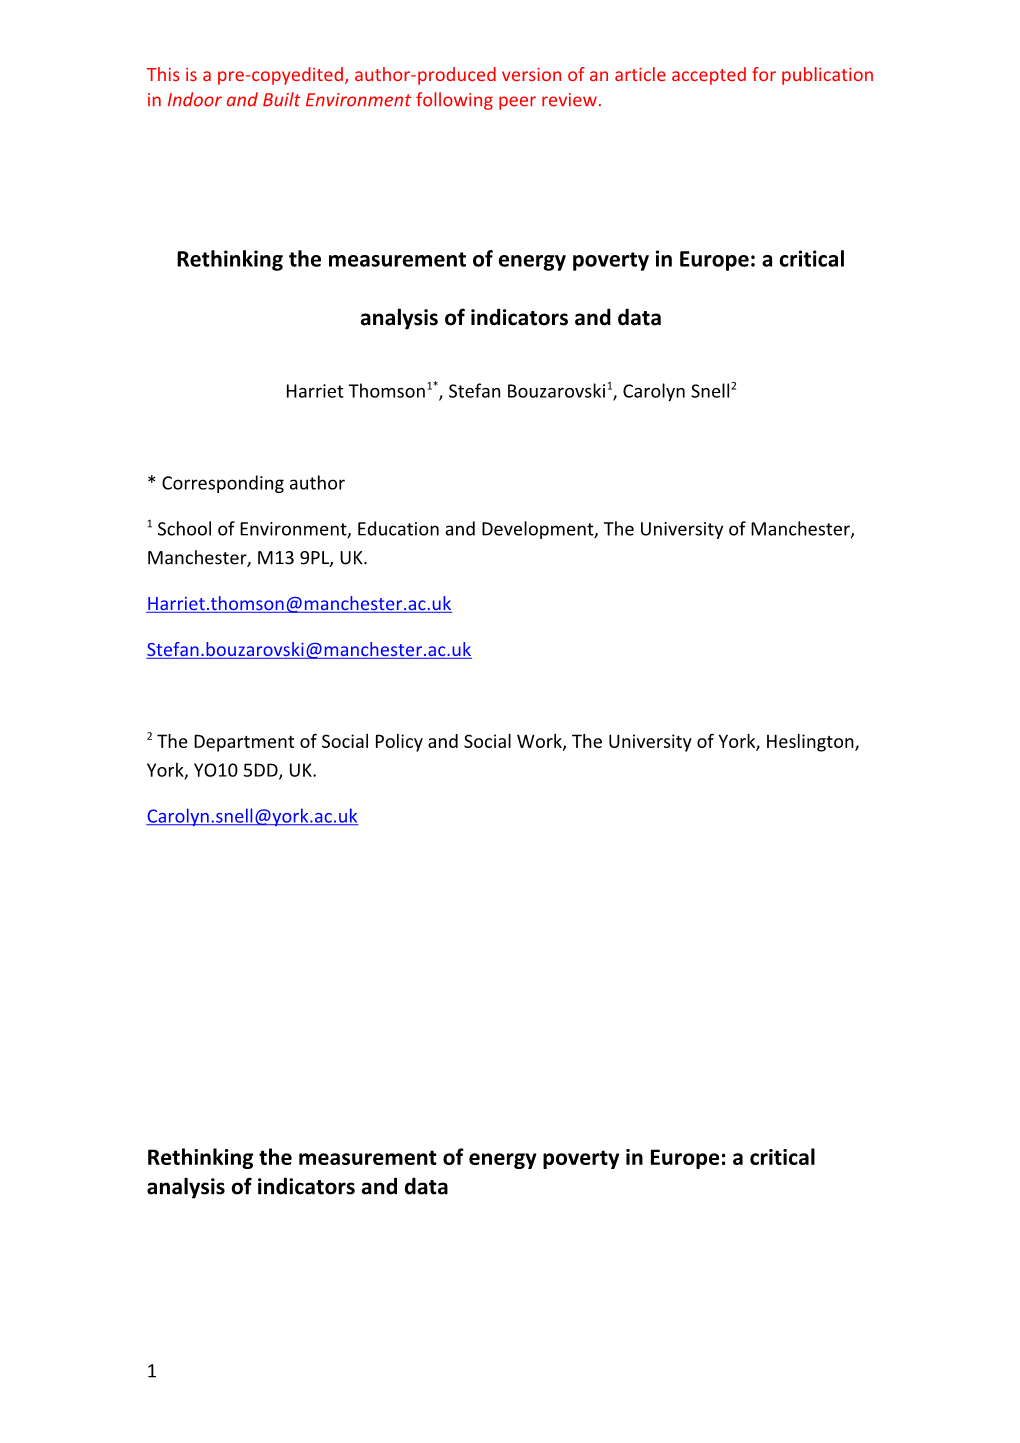 Rethinking the Measurement of Energy Poverty in Europe: a Critical Analysis of Indicators